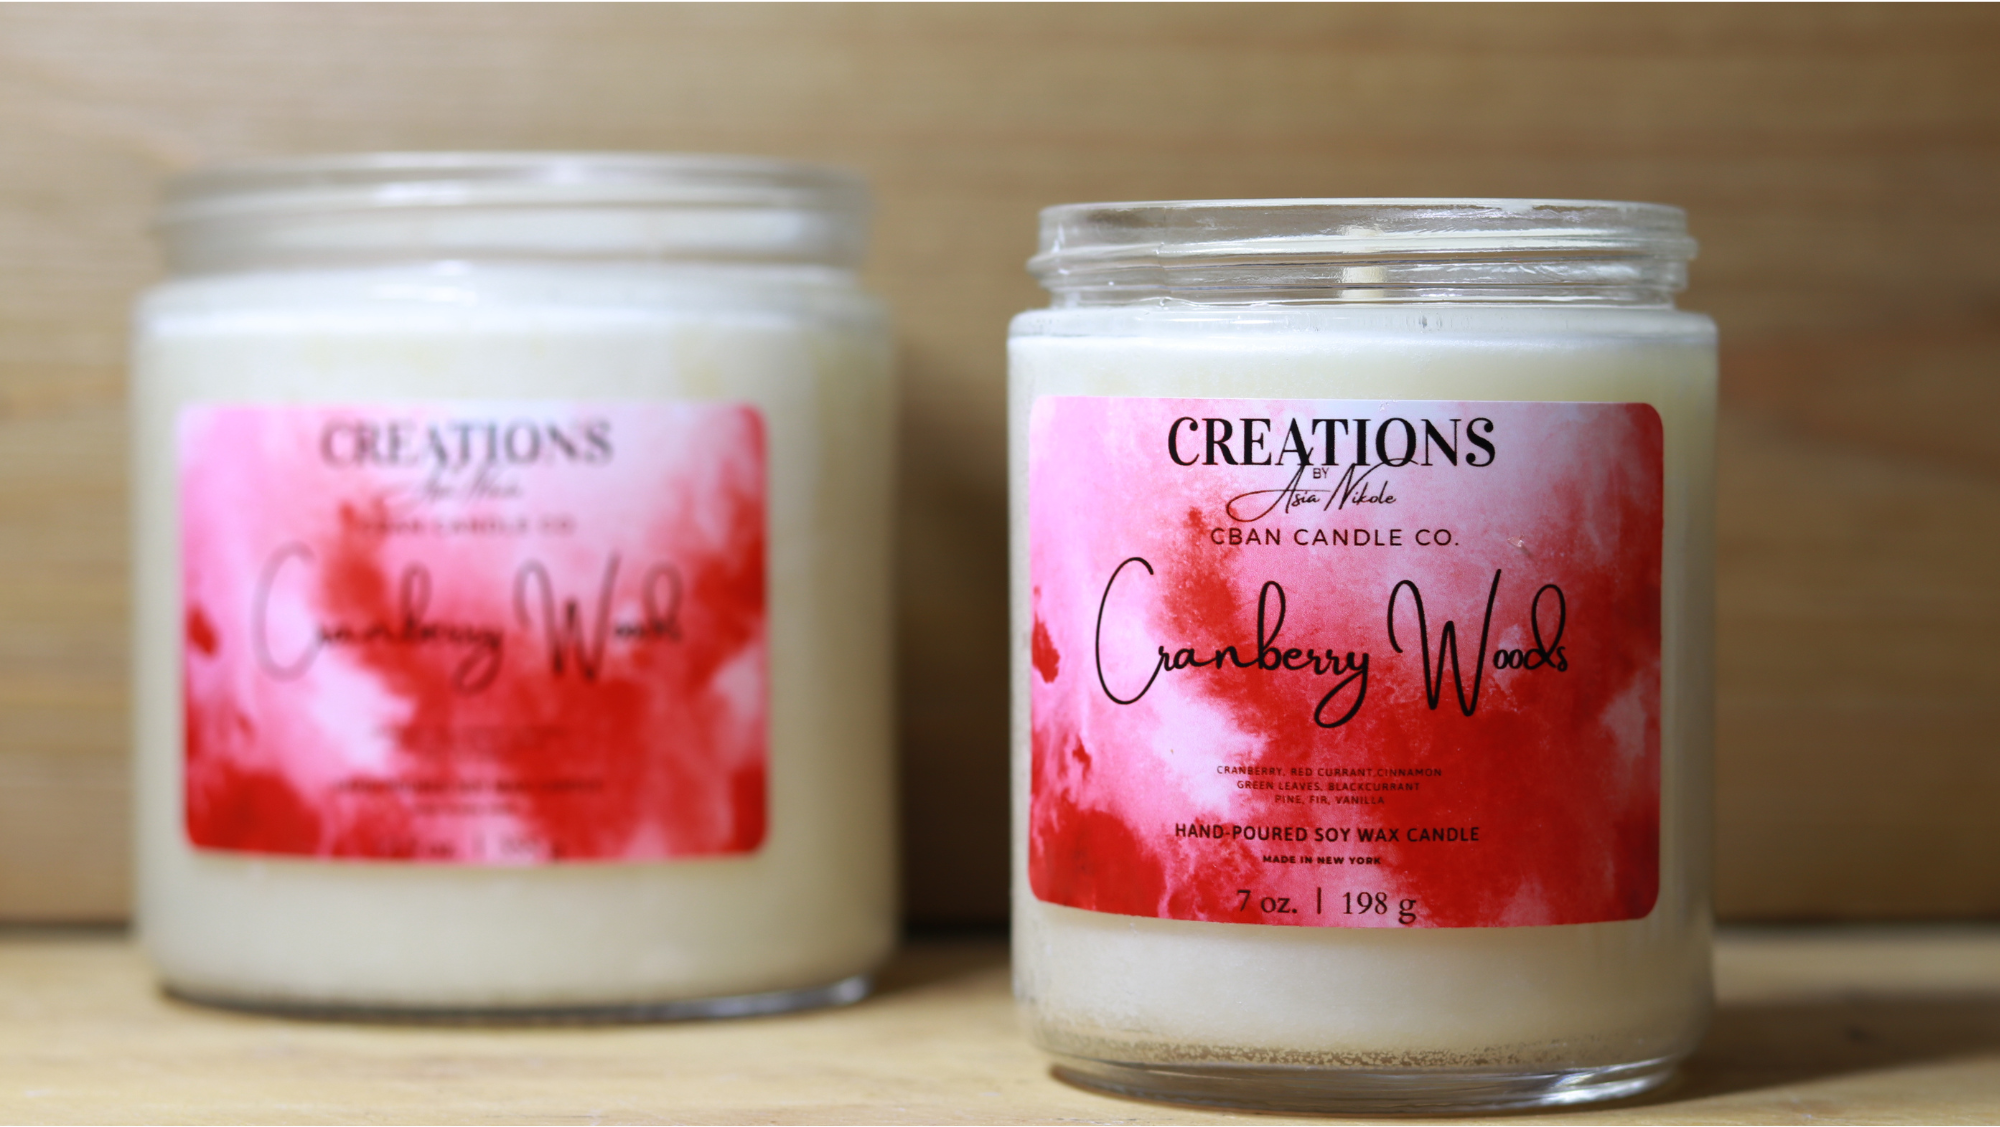 Cranberry Woods- Soy Wax Candle